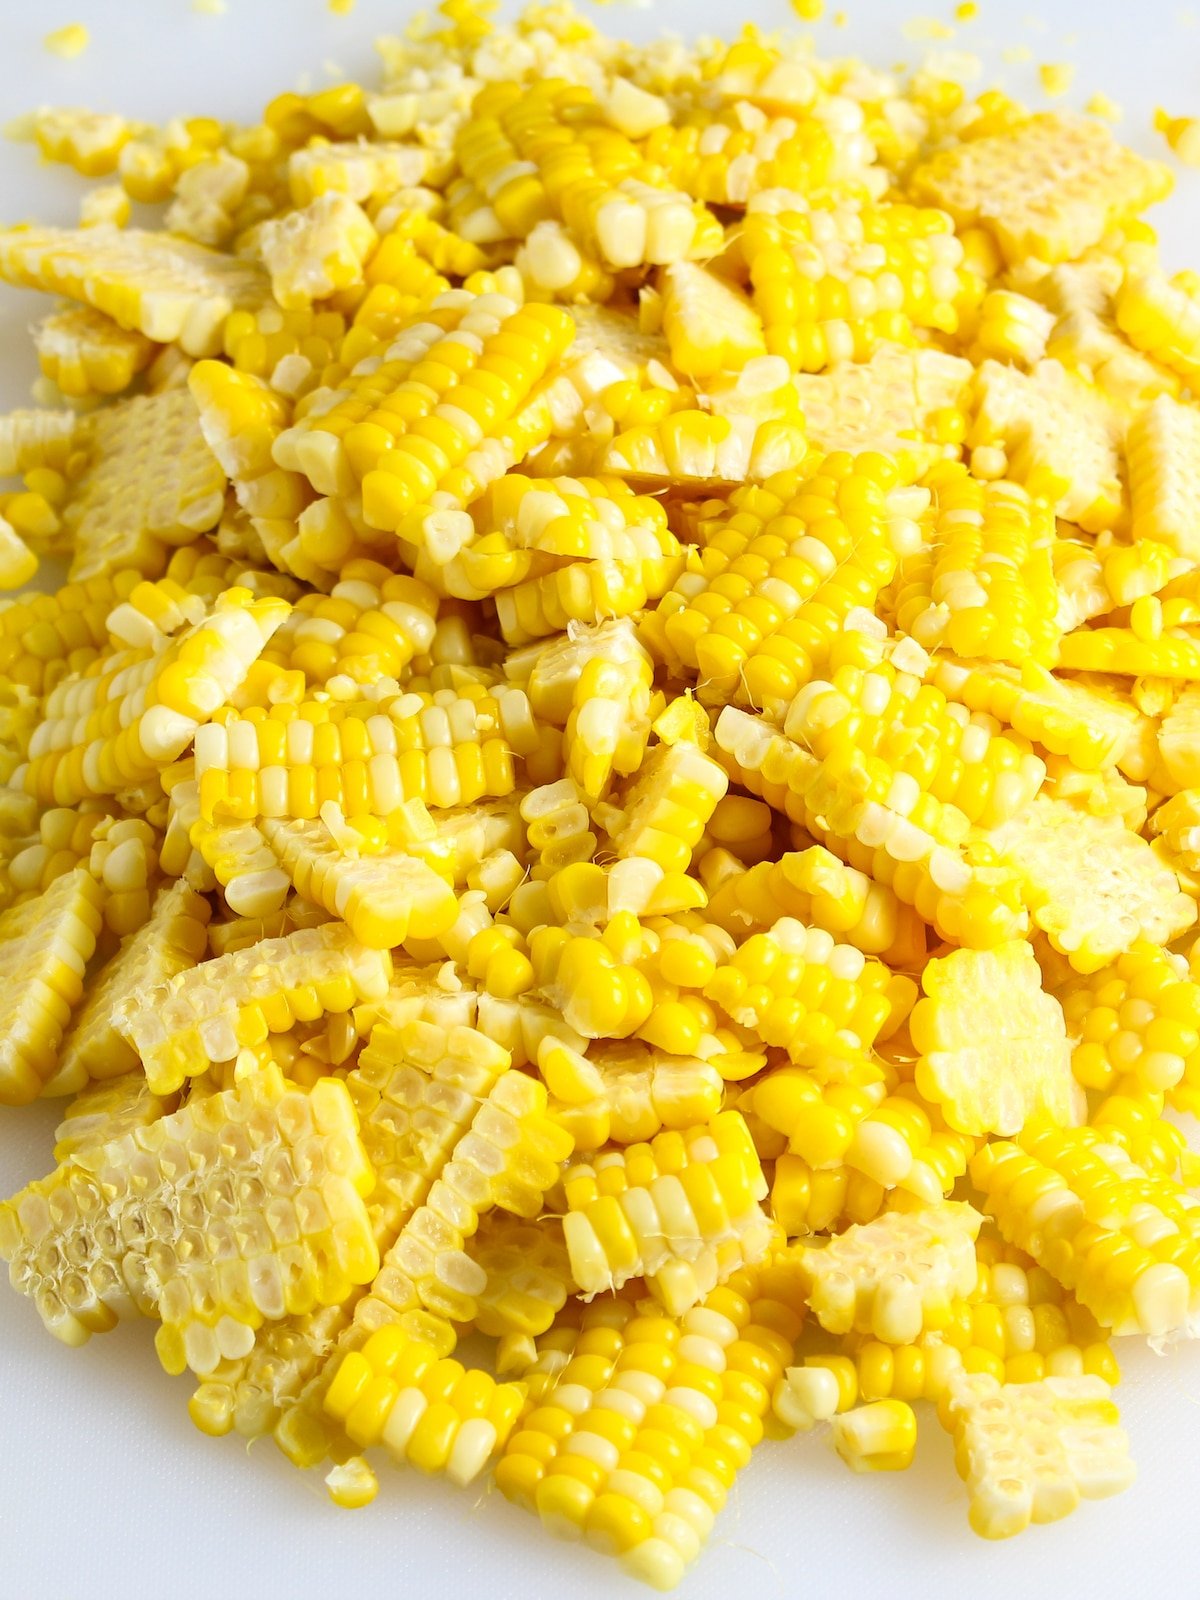 A large pile of corn.